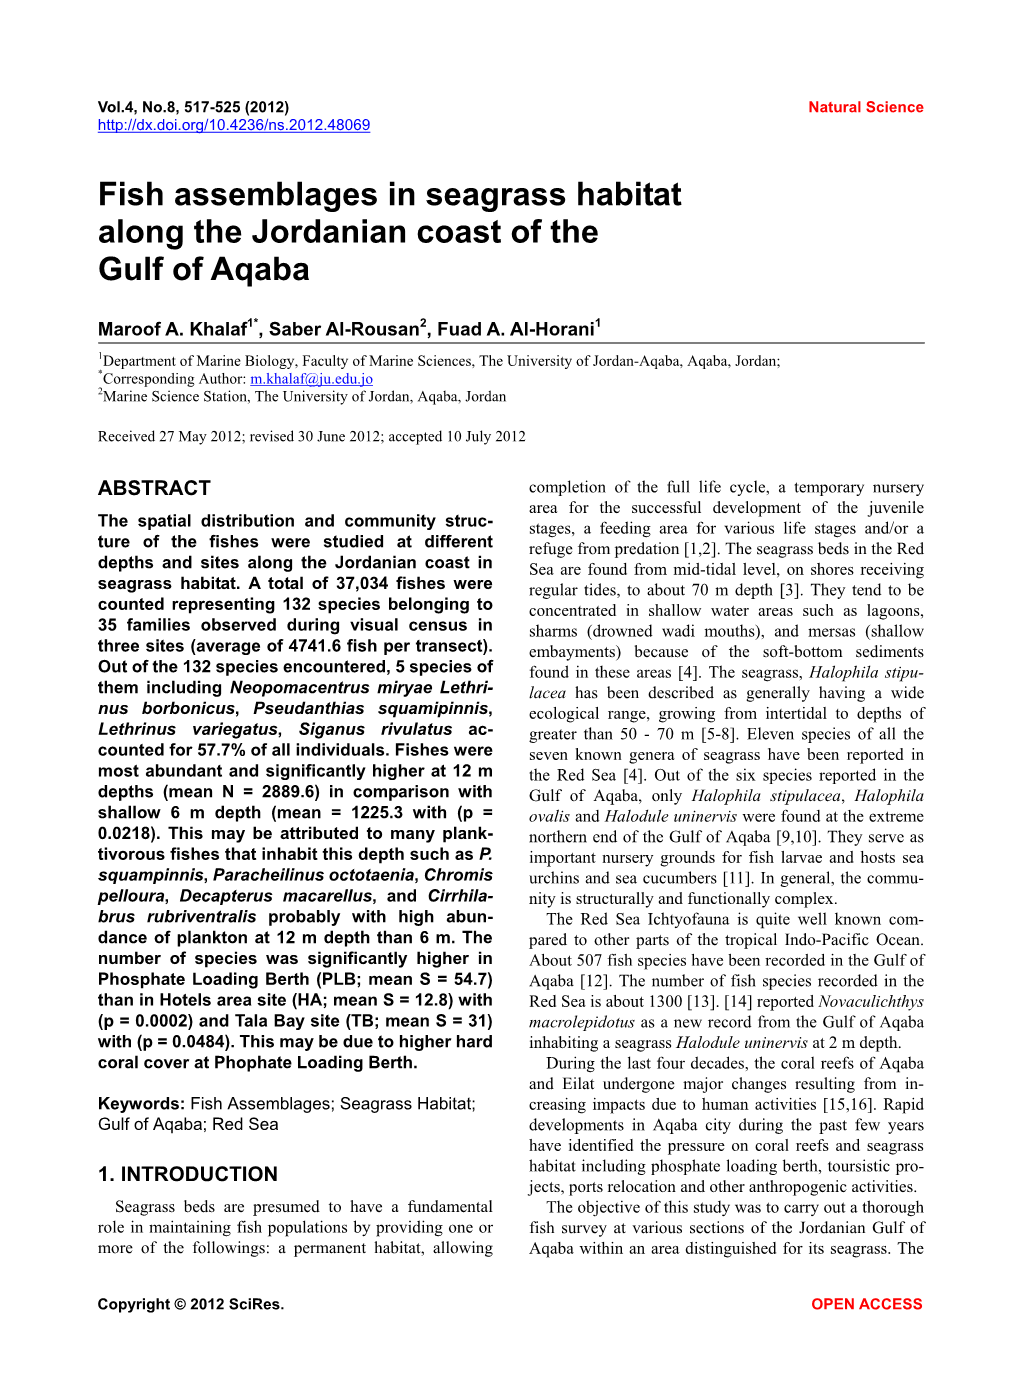 Fish Assemblages in Seagrass Habitat Along the Jordanian Coast of the Gulf of Aqaba